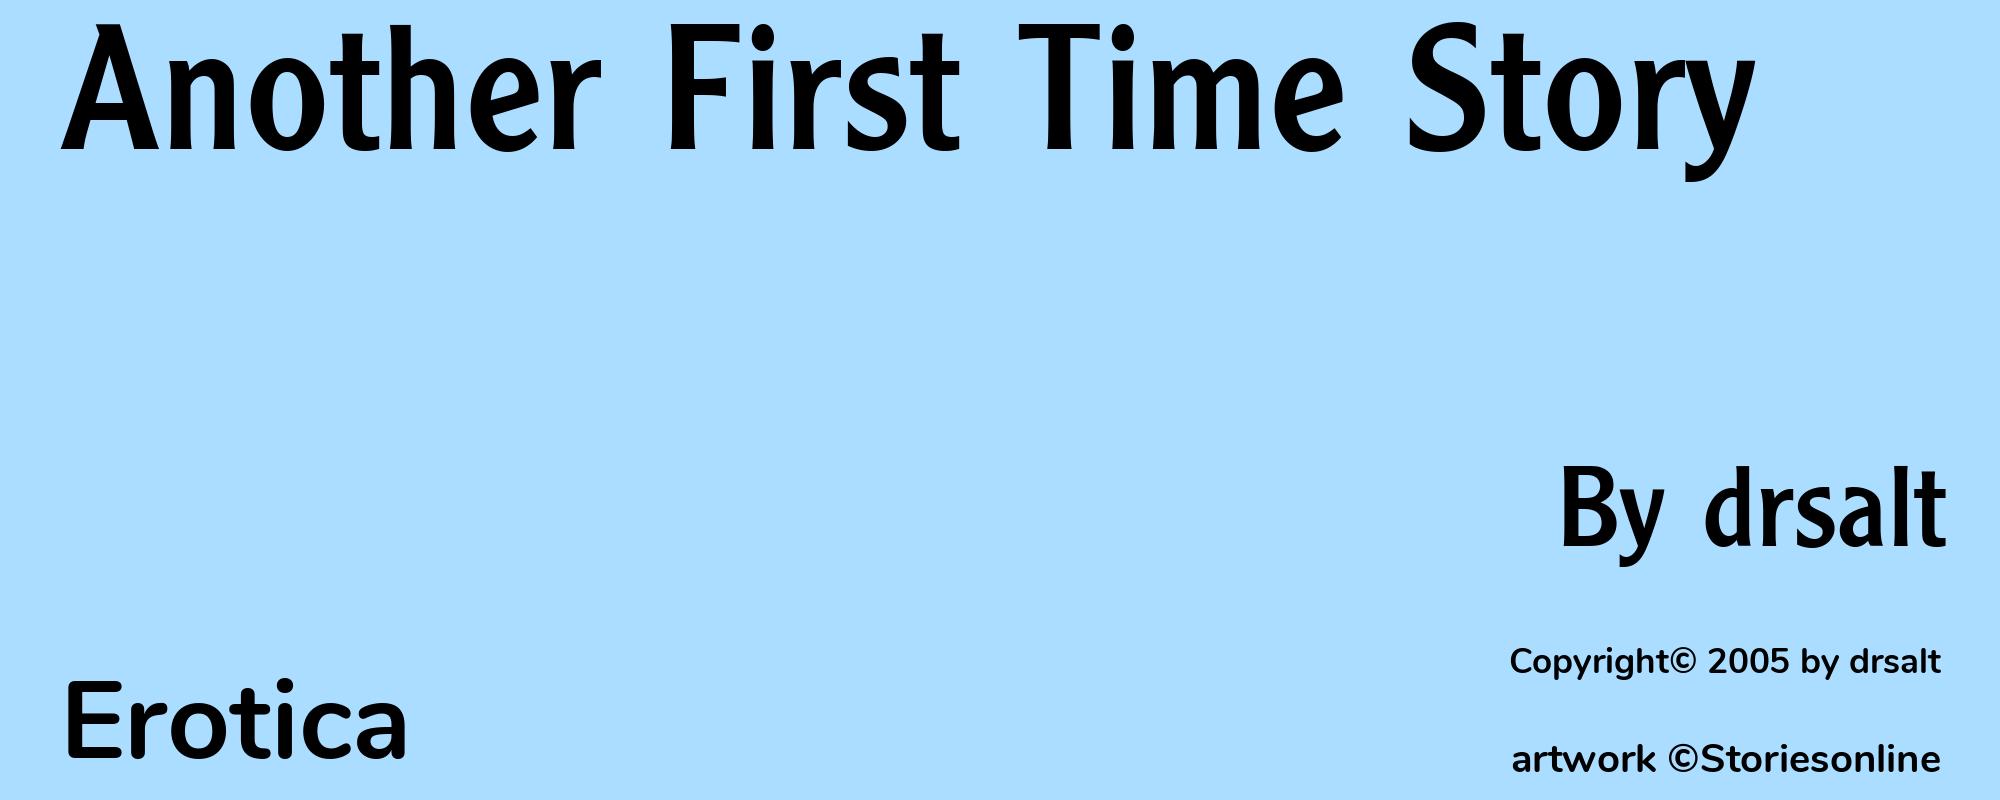 Another First Time Story - Cover